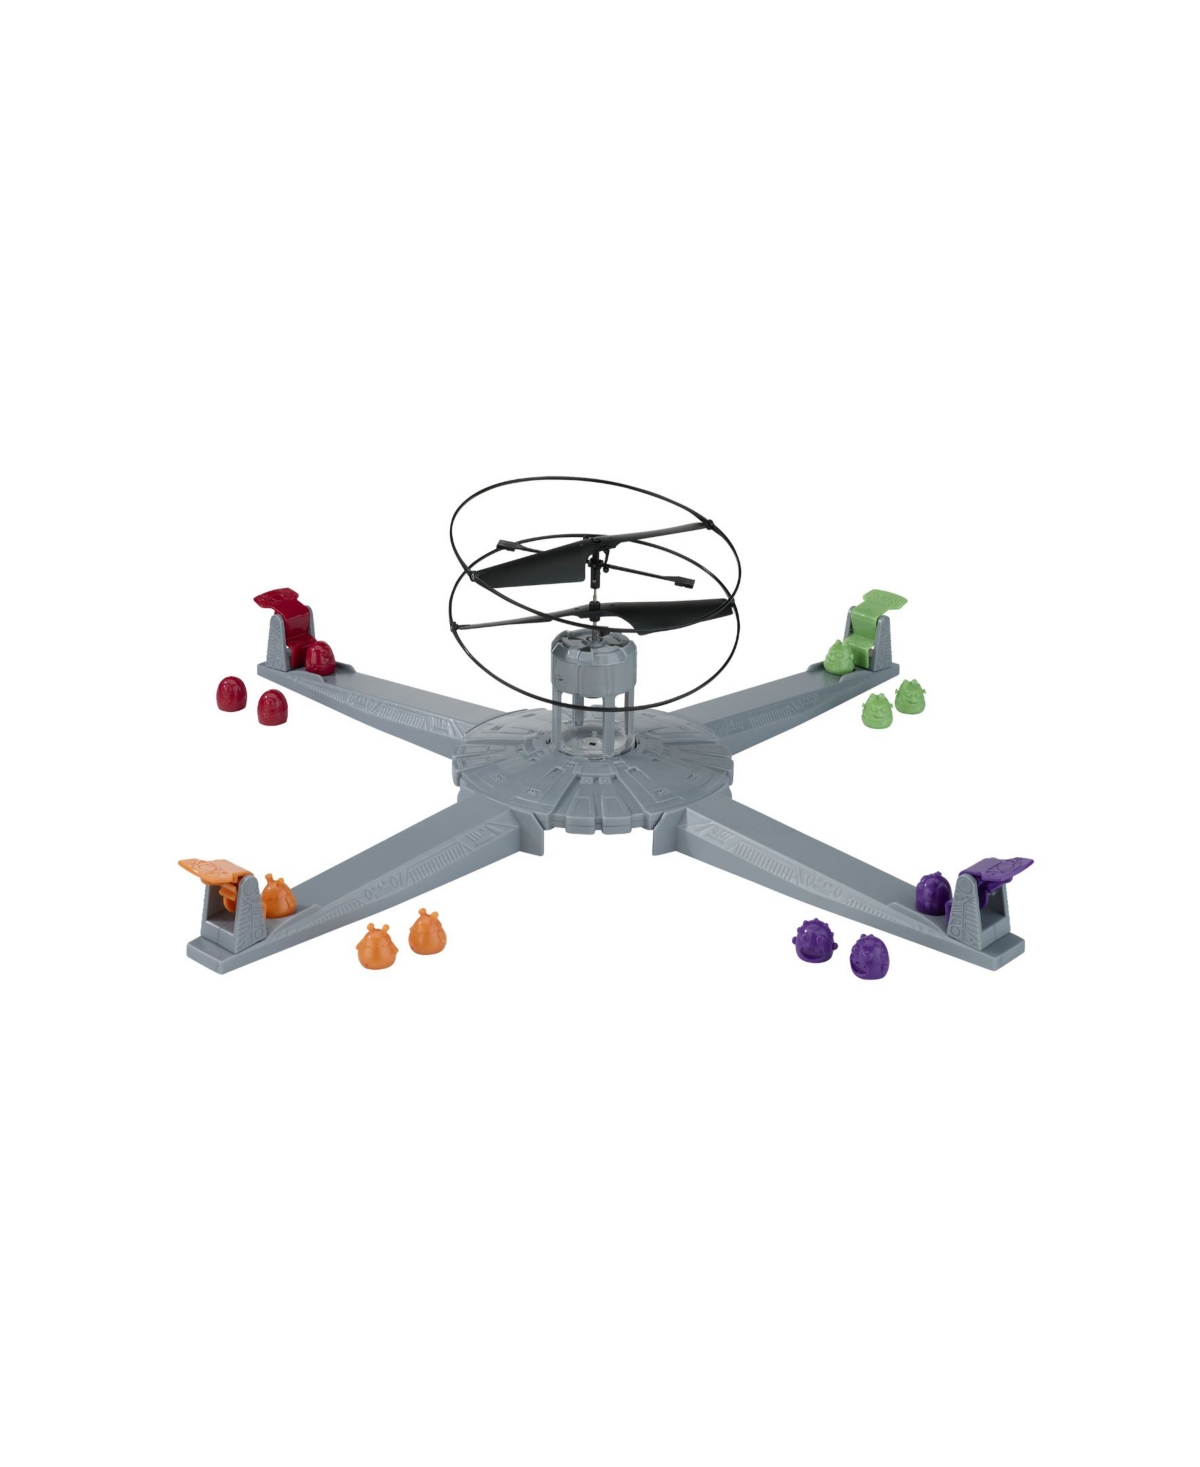 Shop Playmonster Drone Home In No Color